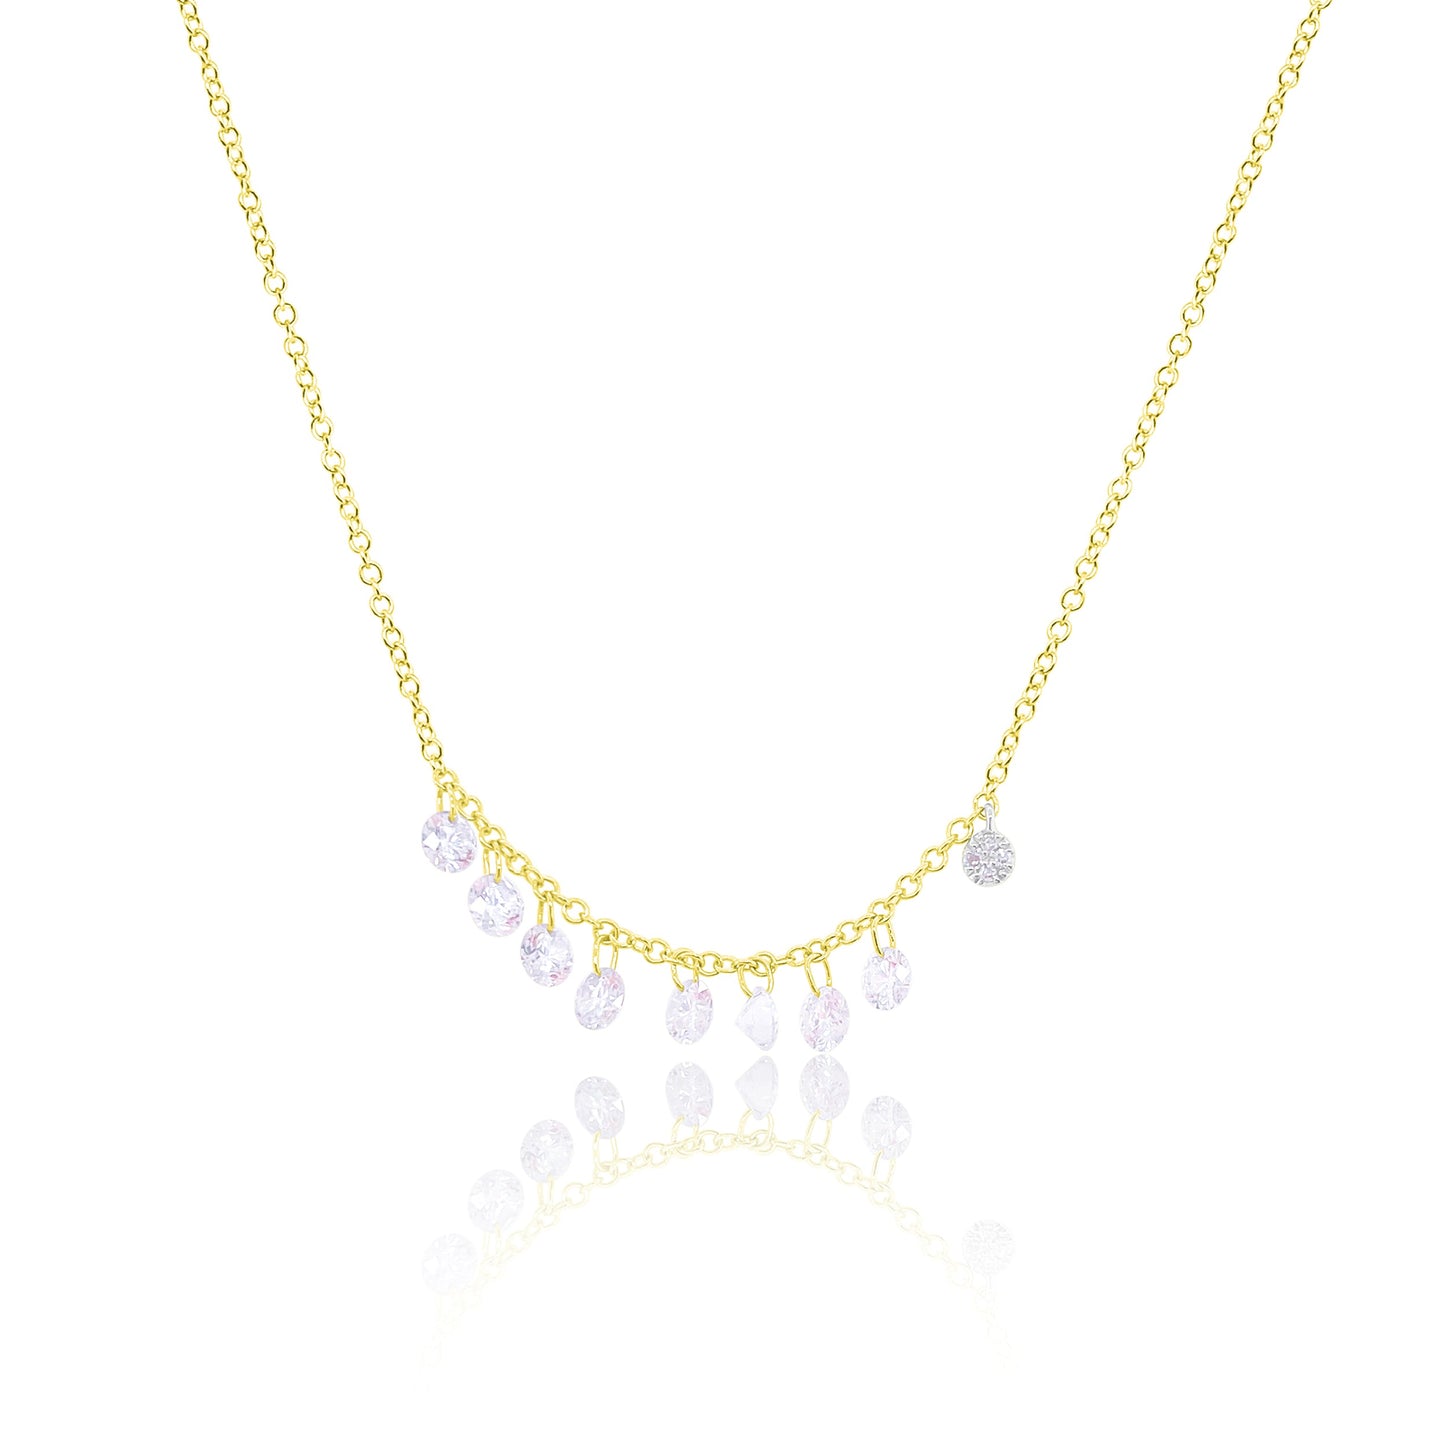 14k Yellow Gold Drilled Diamond Necklace